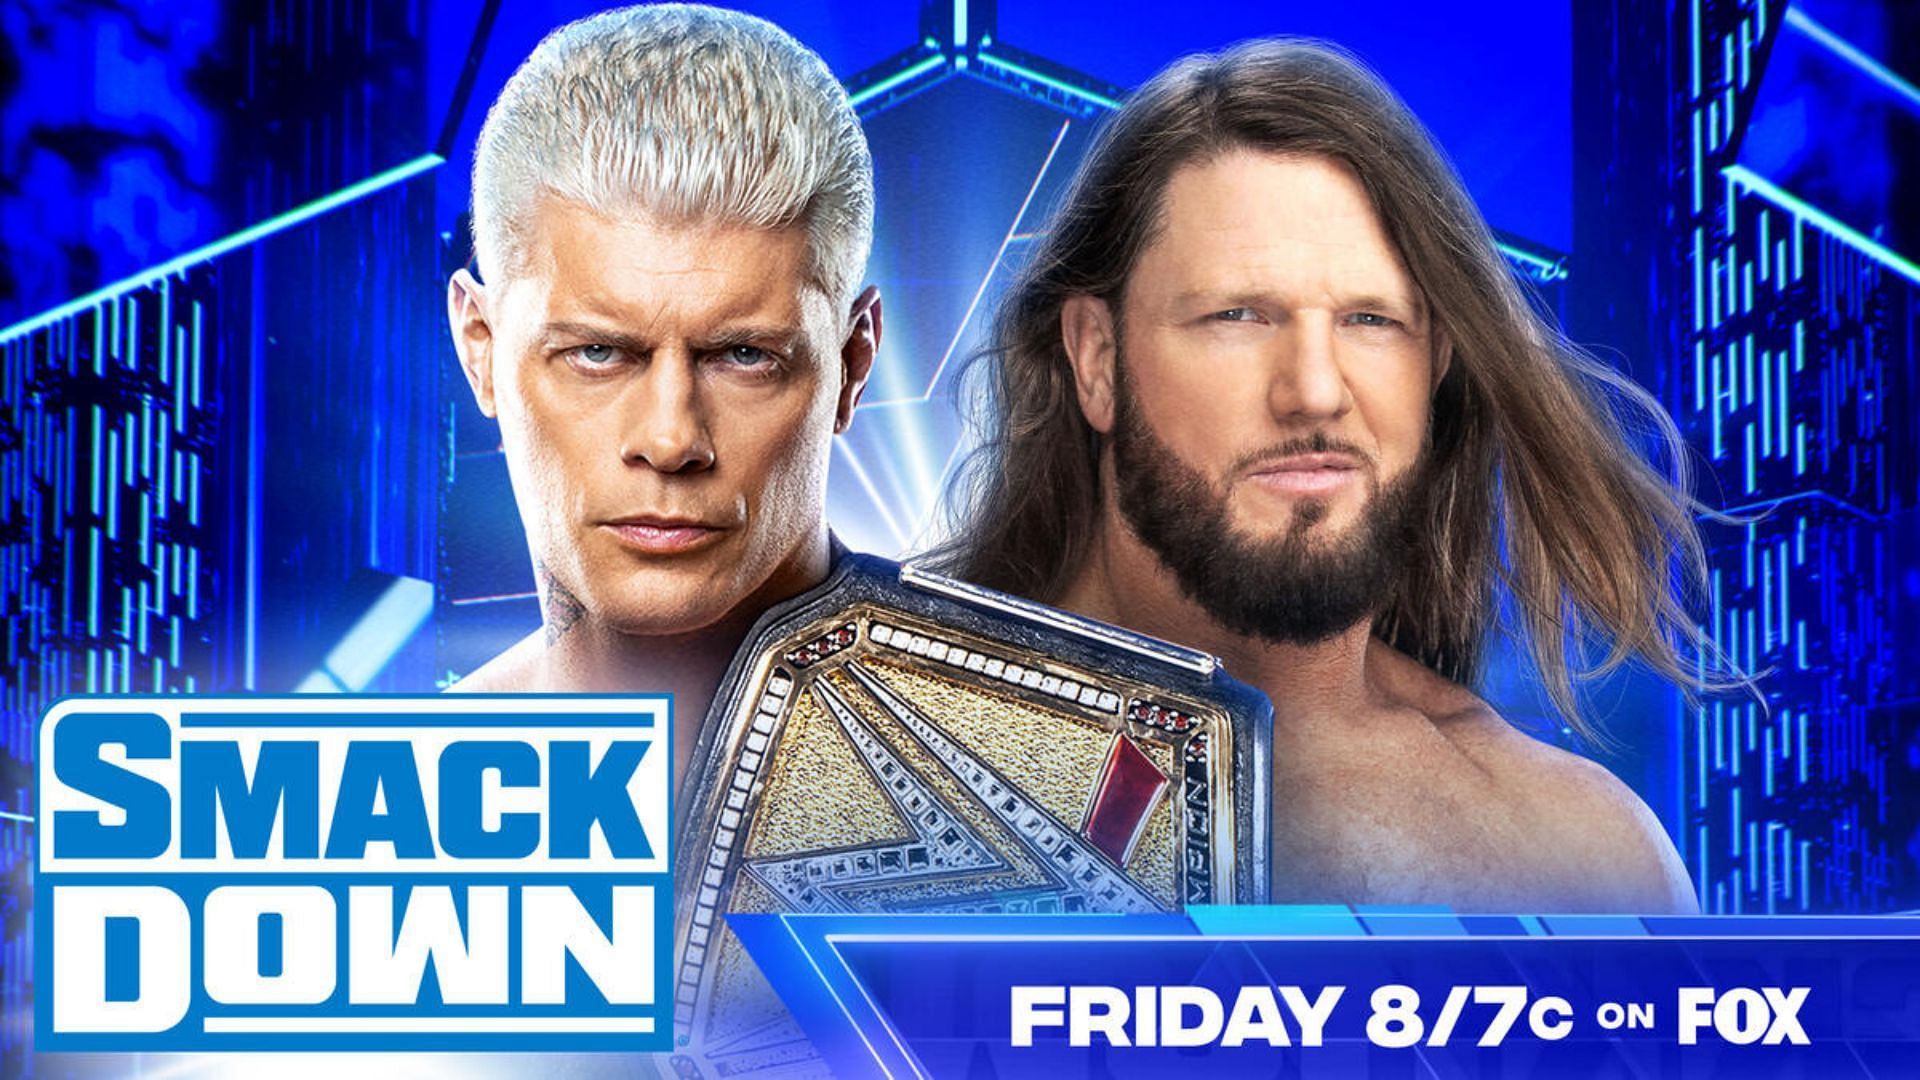 AJ Styles and Cody Rhodes will battle at Backlash France.